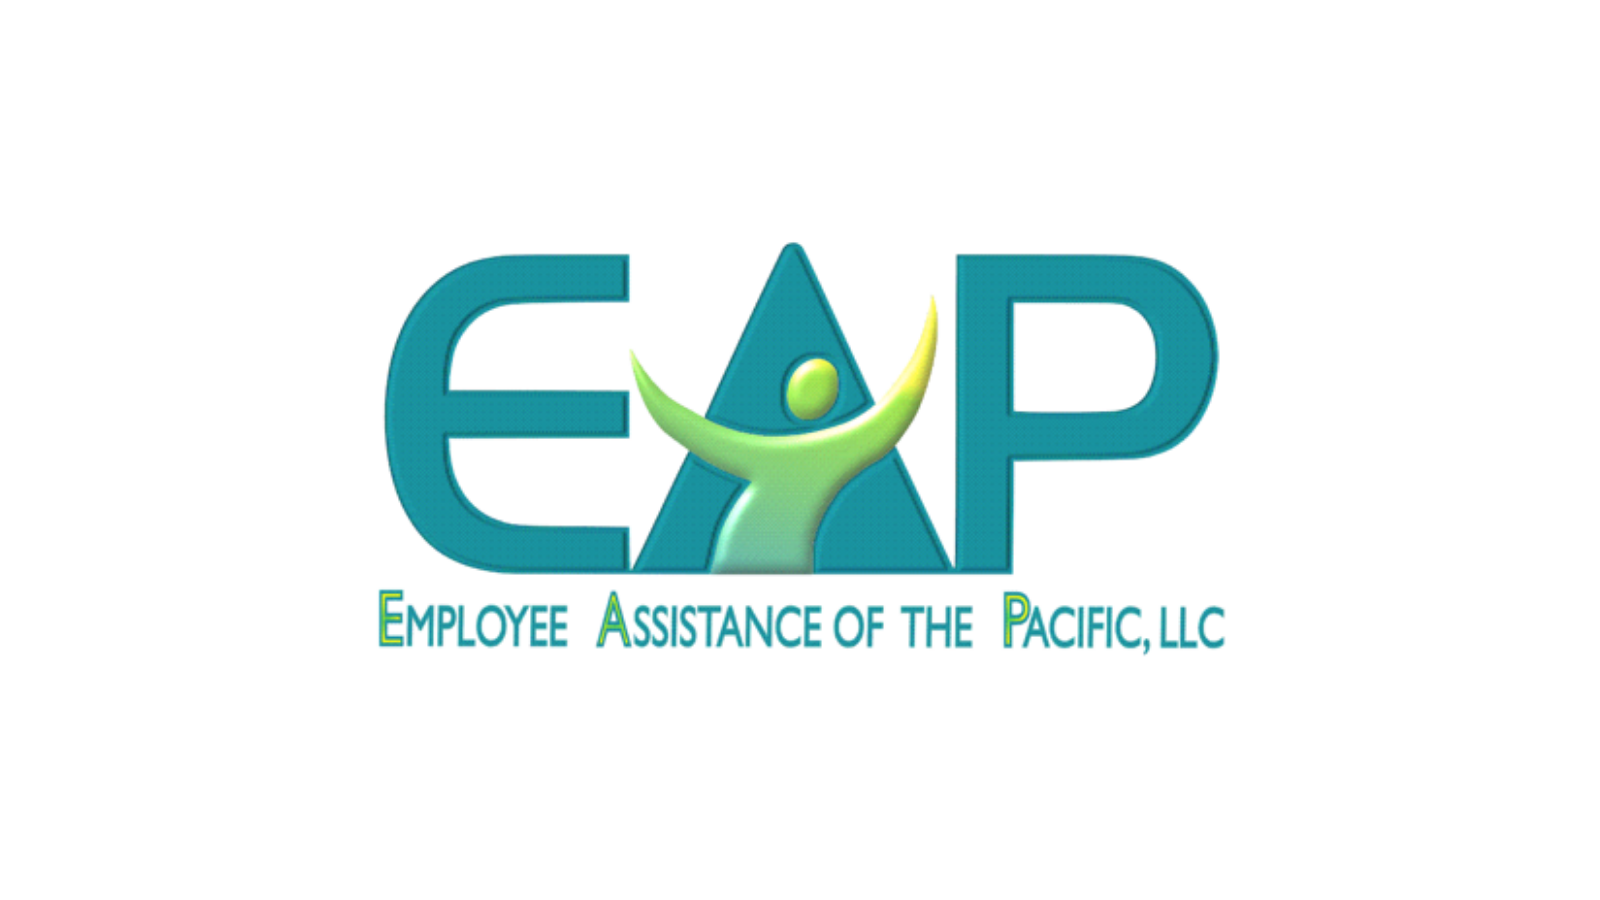 Employee Assistance of the Pacific